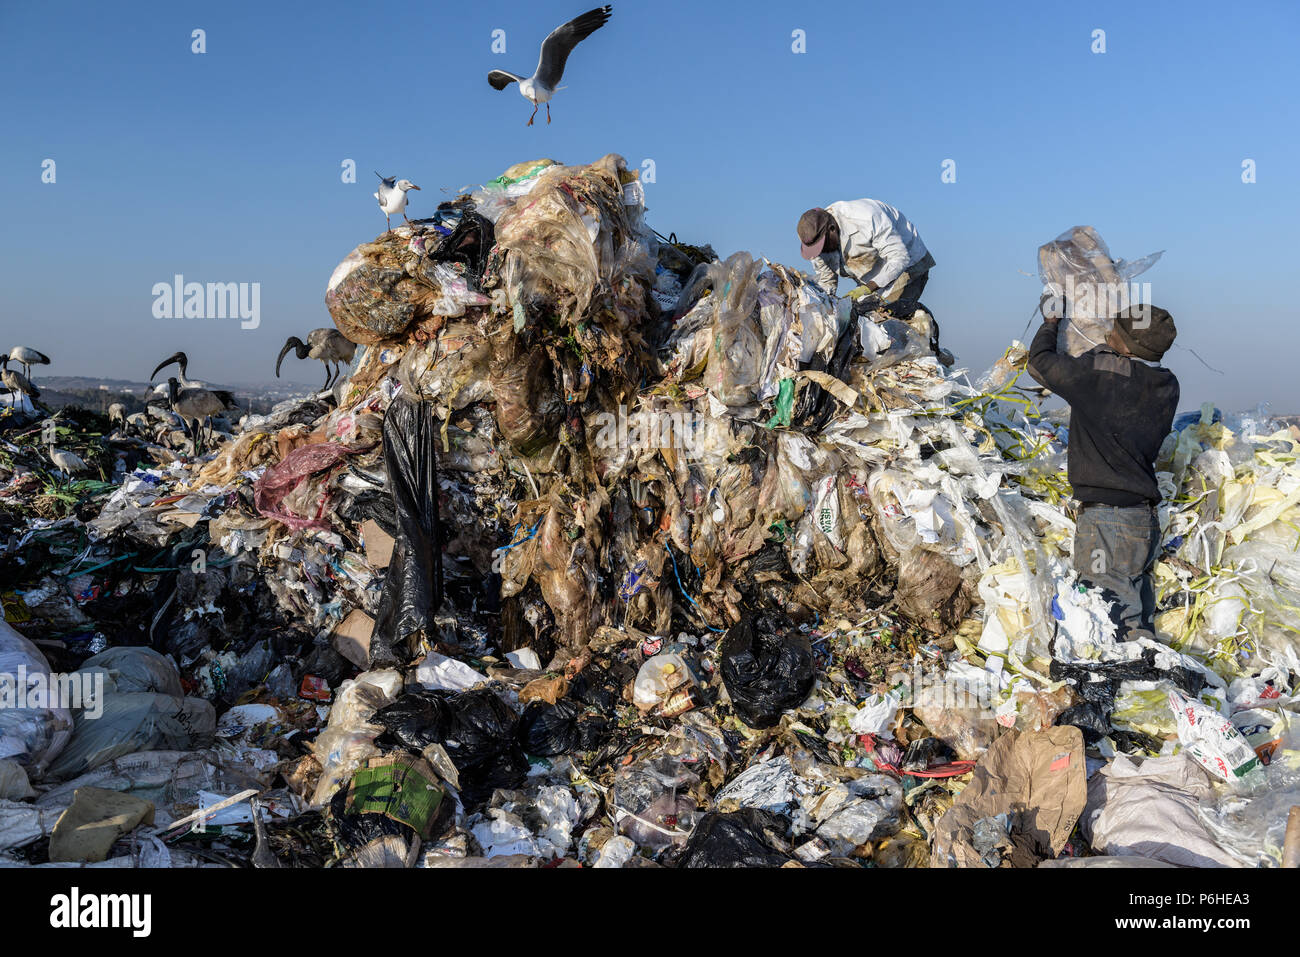 Pickers sort through a mound of plastic at the Robinson Deep landfill in South Africa's commercial capital of Johannesburg Stock Photo